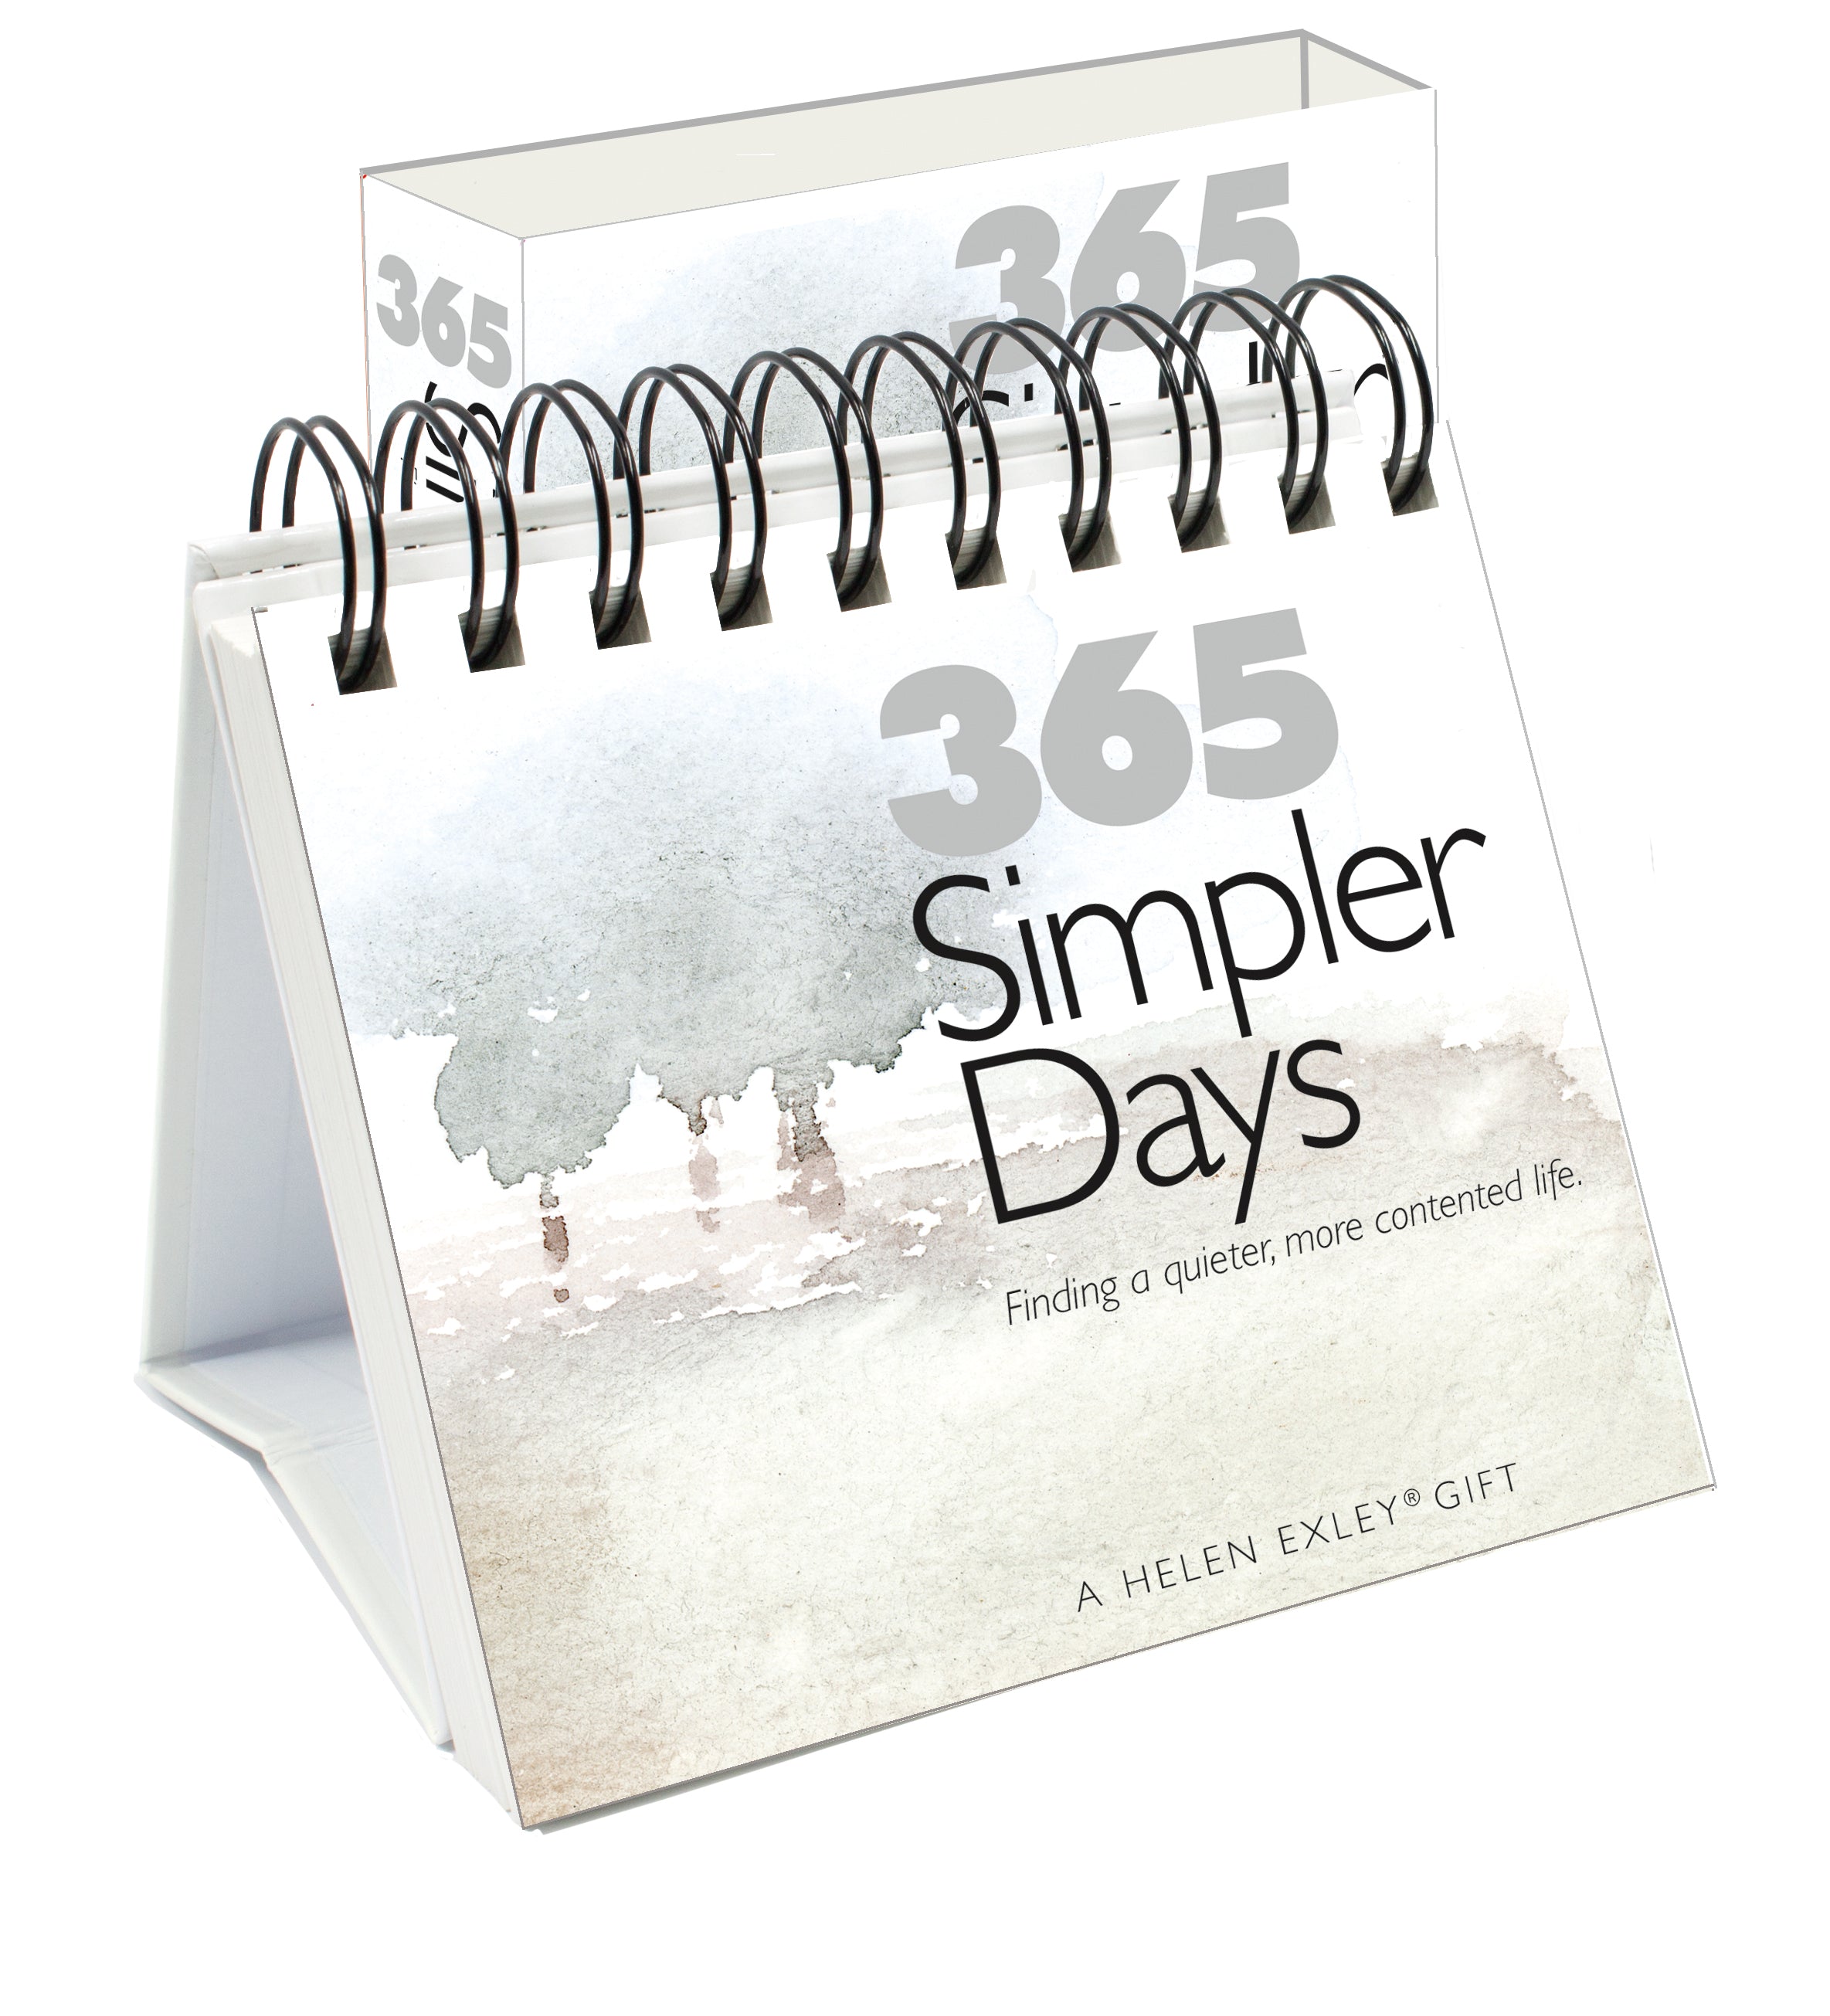 365 Simpler Days - Finding a quieter, more contented life